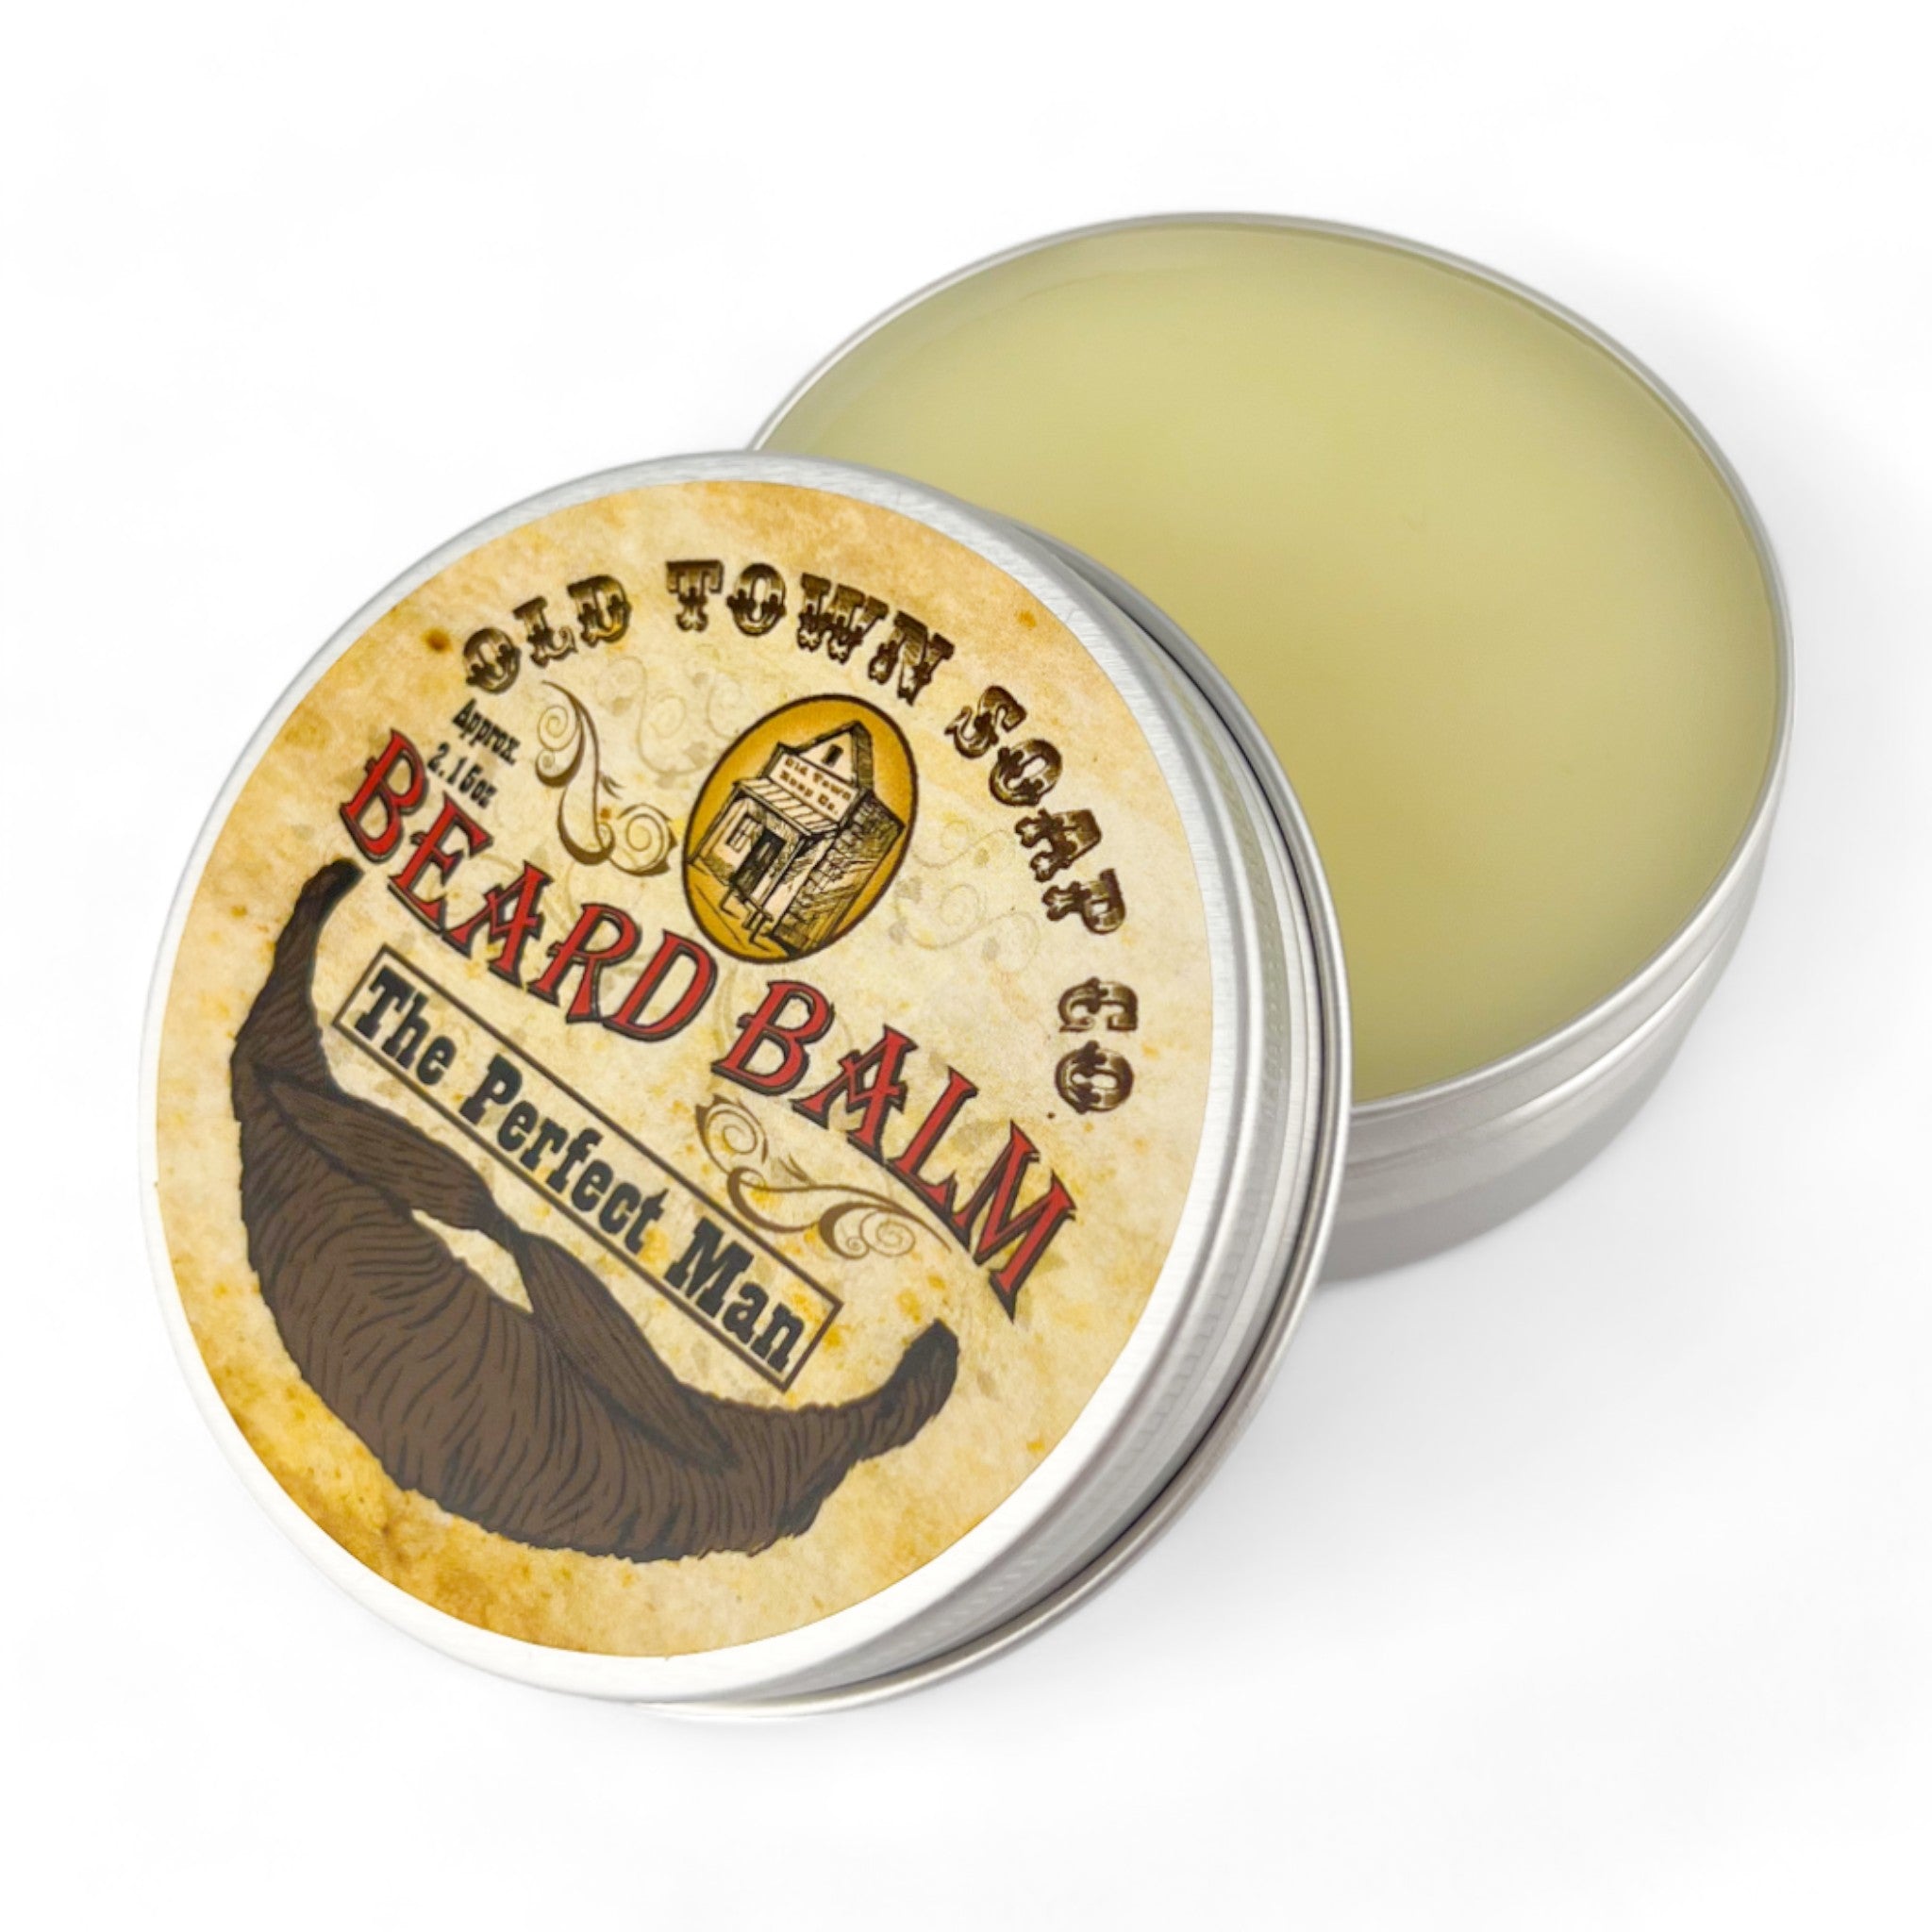 The Perfect Man Beard Balm - Old Town Soap Co.